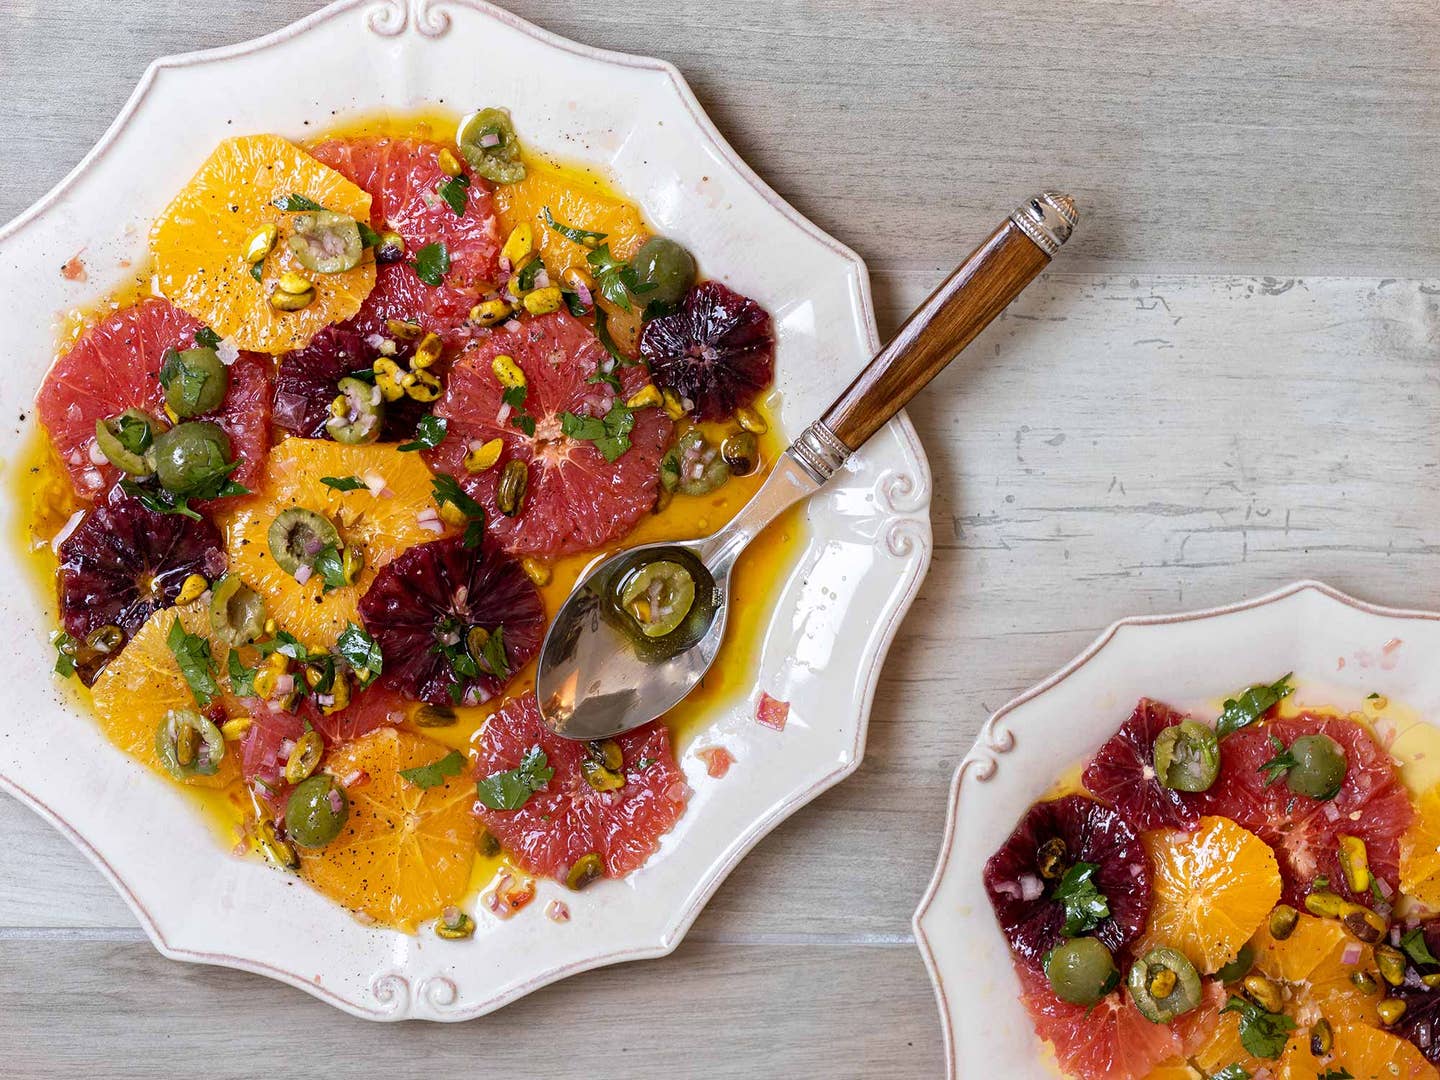 Winter citrus salad with olive oil, and briny Castelvetrano olives